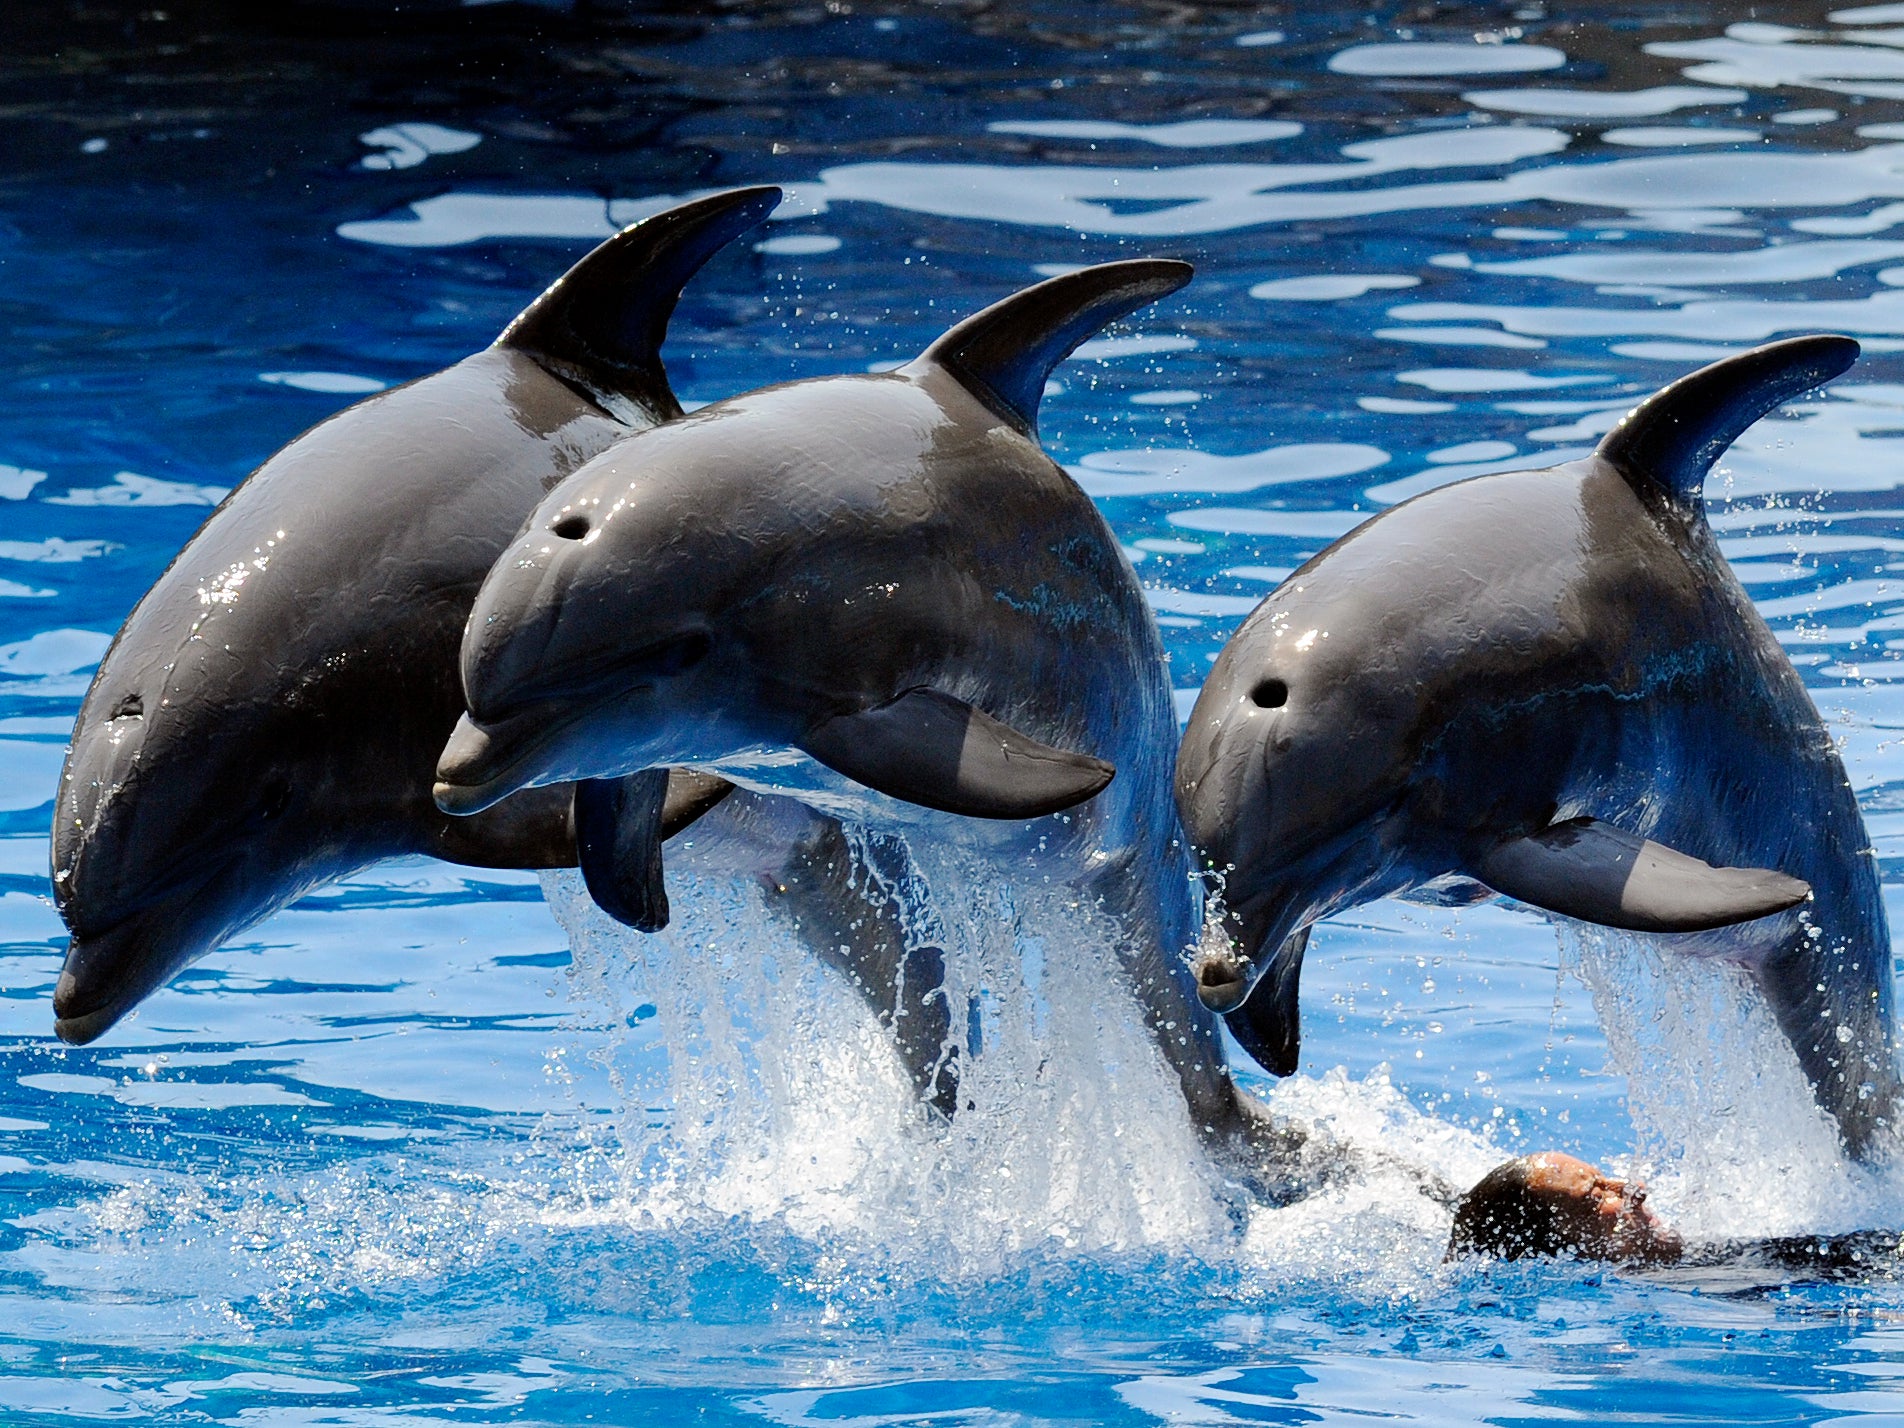 Captive bottlenose dolphins were studied by staff